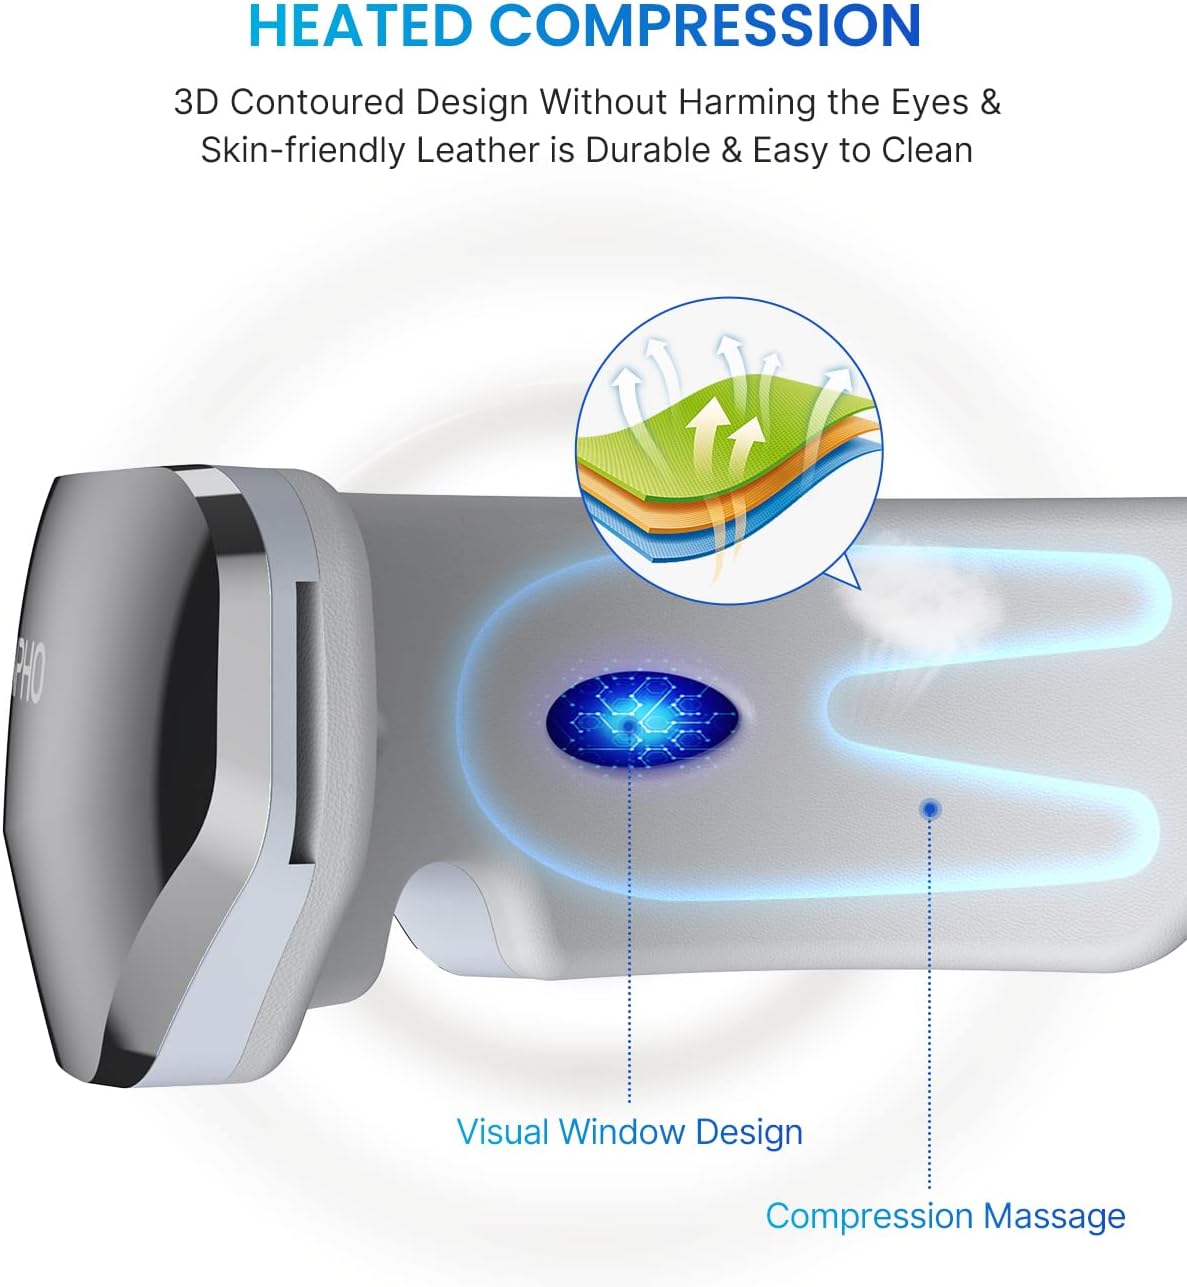 RENPHO Eyeris View - Eye Massager Extended with Heat, Compression,Vision Window, 5 Modes Eye Care Device for Migraines Relief, Relax Eye Strain, Reduce Dry Eyes, Temple Massager, Christmas Gifts